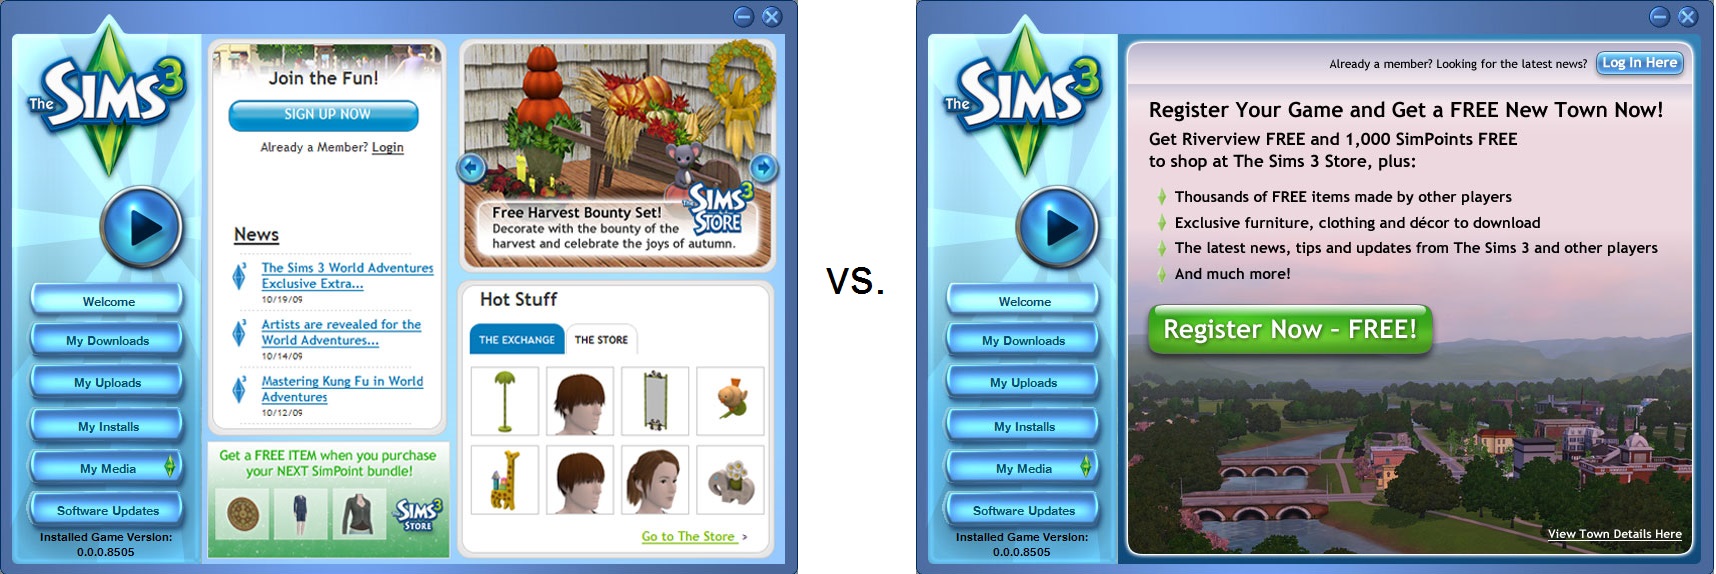 The Sims 3 A/B Testing